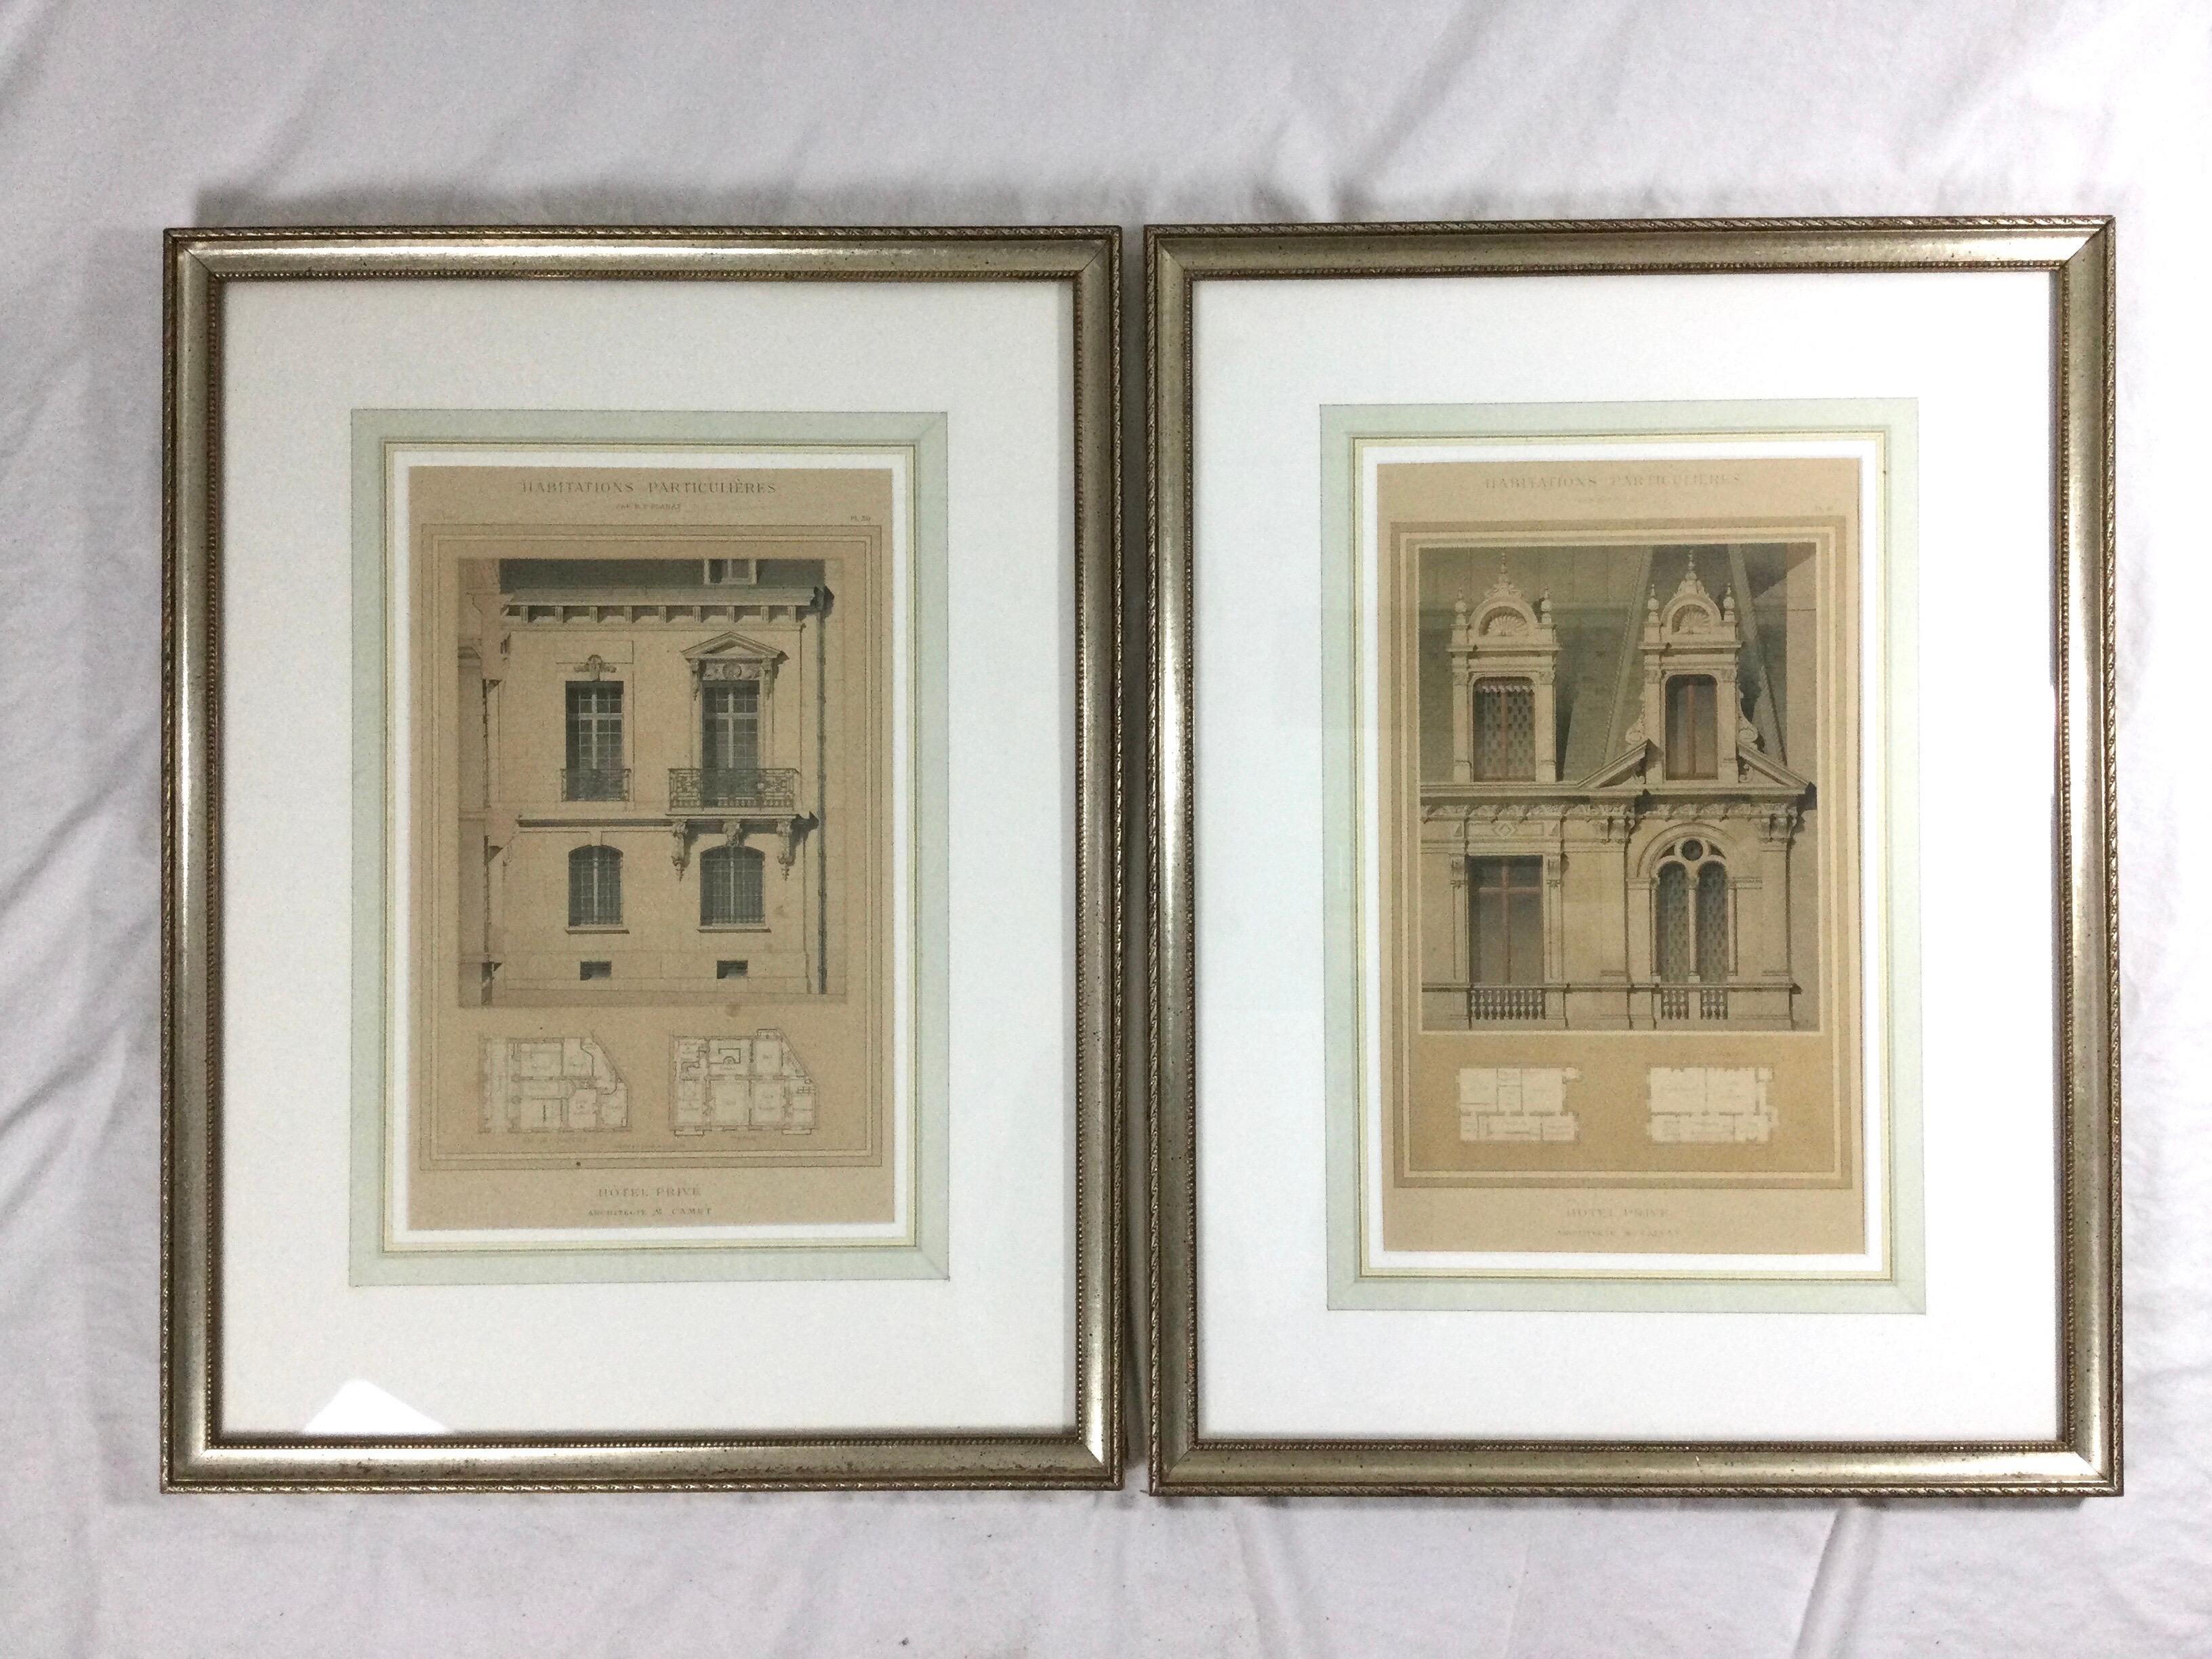 Pair Antique Hotel Architectural Lithograph Prints, Paul Planat France. Nicely framed pair of numbered plates. Very minor aging to the paper and age appropriate wear. Probably framed in the 80's? Overall size is 19 1,2